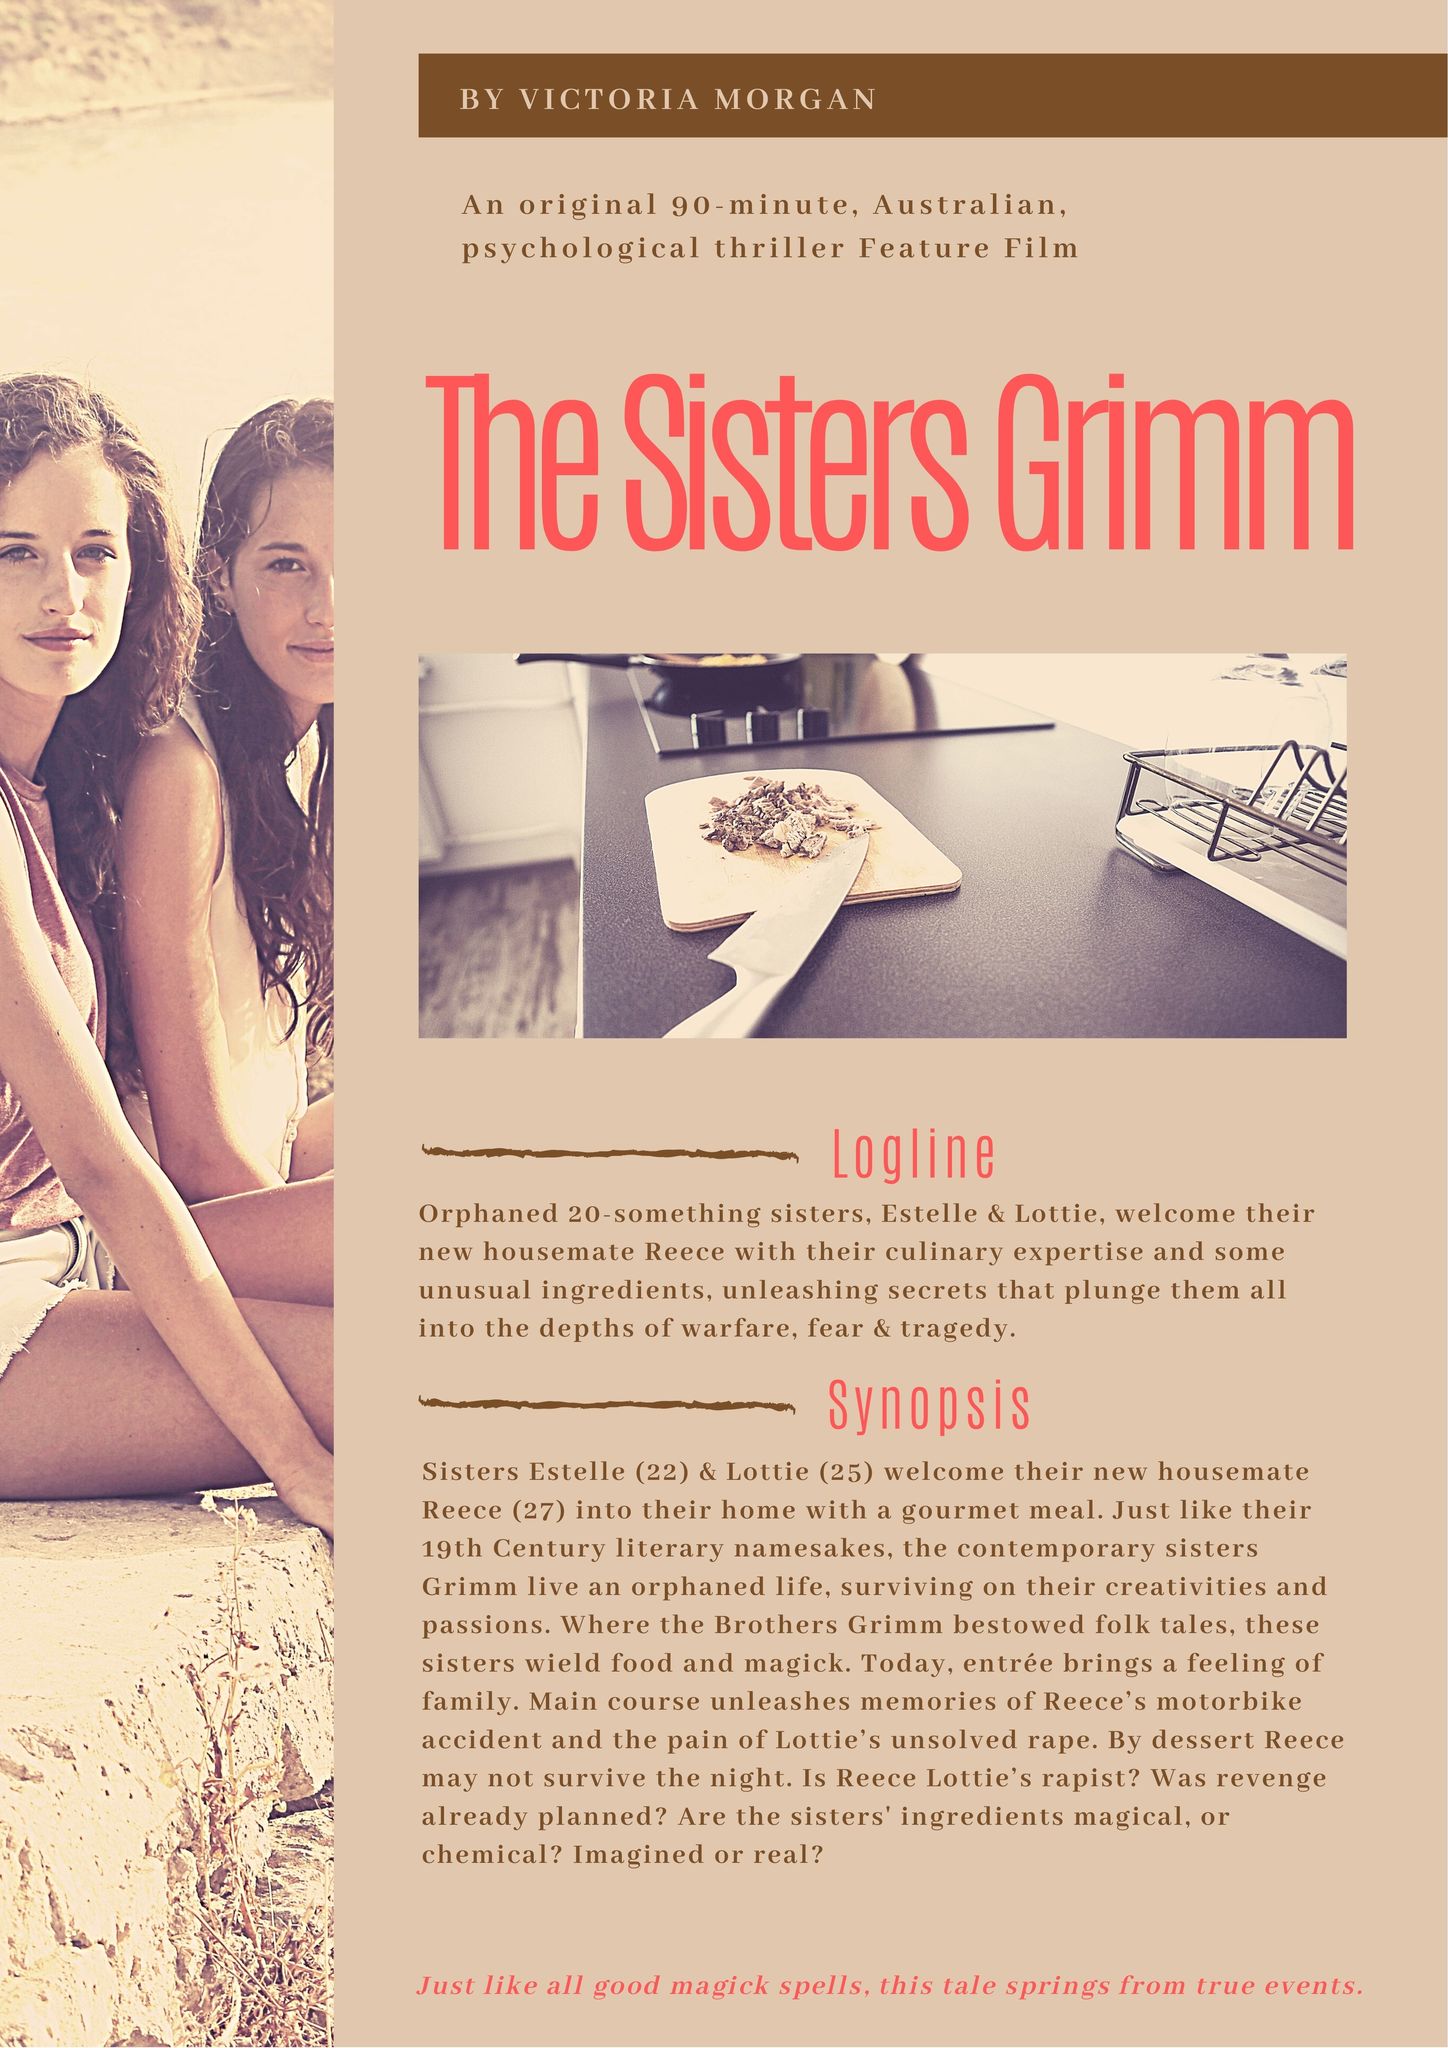 THE SISTERS GRIMM